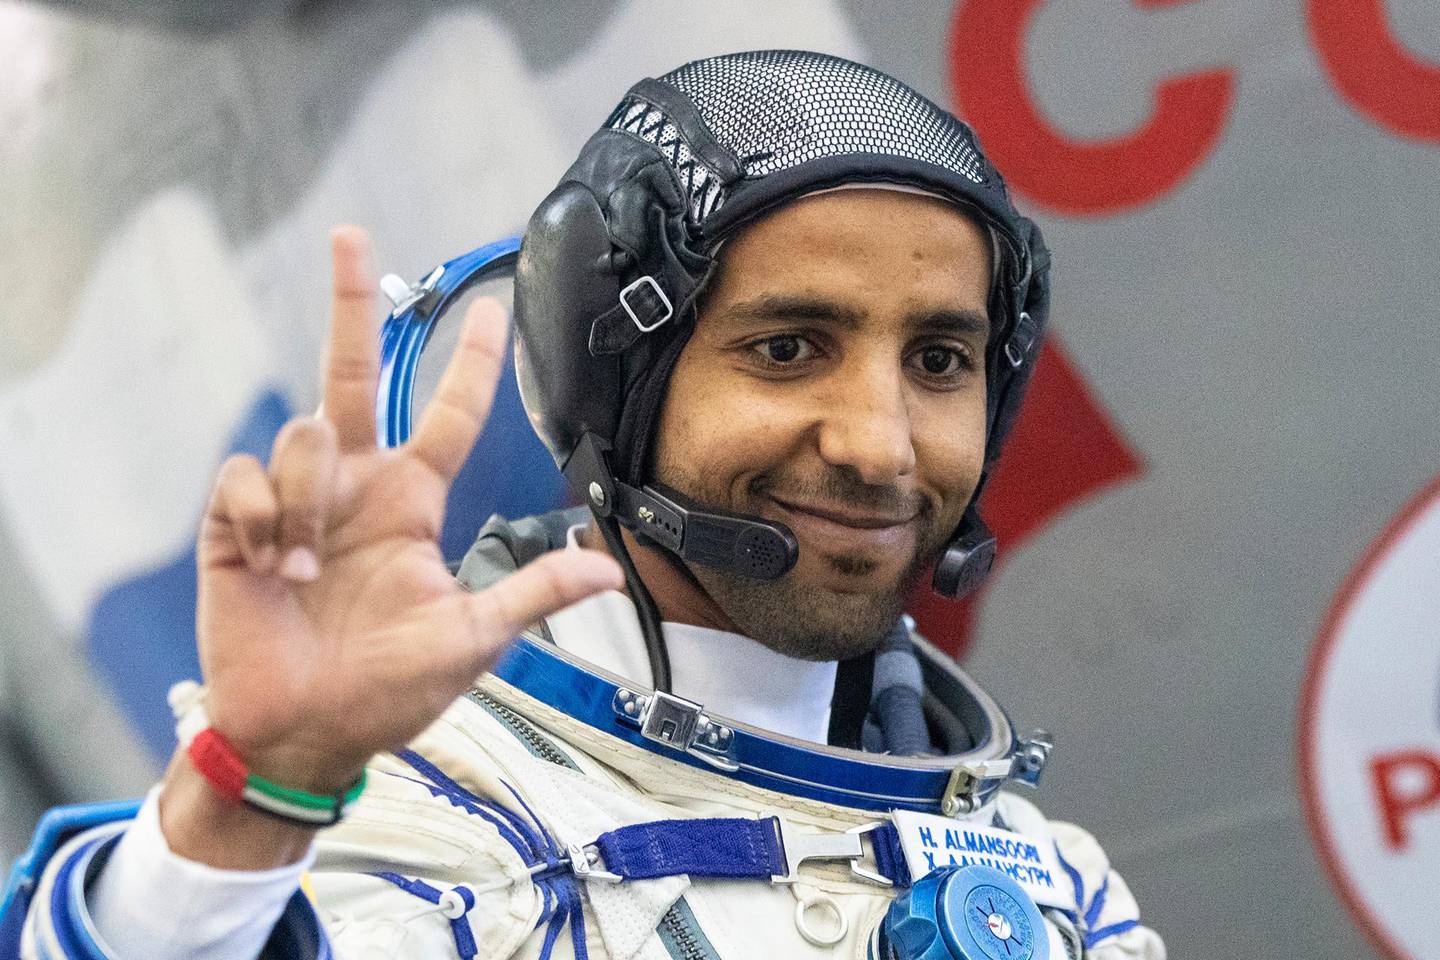 United Arab Emirates astronaut Hazza Al Mansouri gestures before his final preflight practical examination in a mock-up of a Soyuz space craft at Russian Space Training Center in Star City, outside Moscow, Russia, Friday, Aug. 30, 2019. Russian cosmonaut Oleg Skripochkaâ€Ž, U.S. astronaut Jessica Meir and United Arab Emirates astronaut Hazza Al Mansouri are the next crew scheduled to blast off to the International Space Station from the Baikonur Cosmodrome on a Russian made Soyuz MS-15 space craft going to be launched on September 25.  Hand gesture in UAE means Win, Victory, Love.  (AP Photo/Pavel Golovkin)